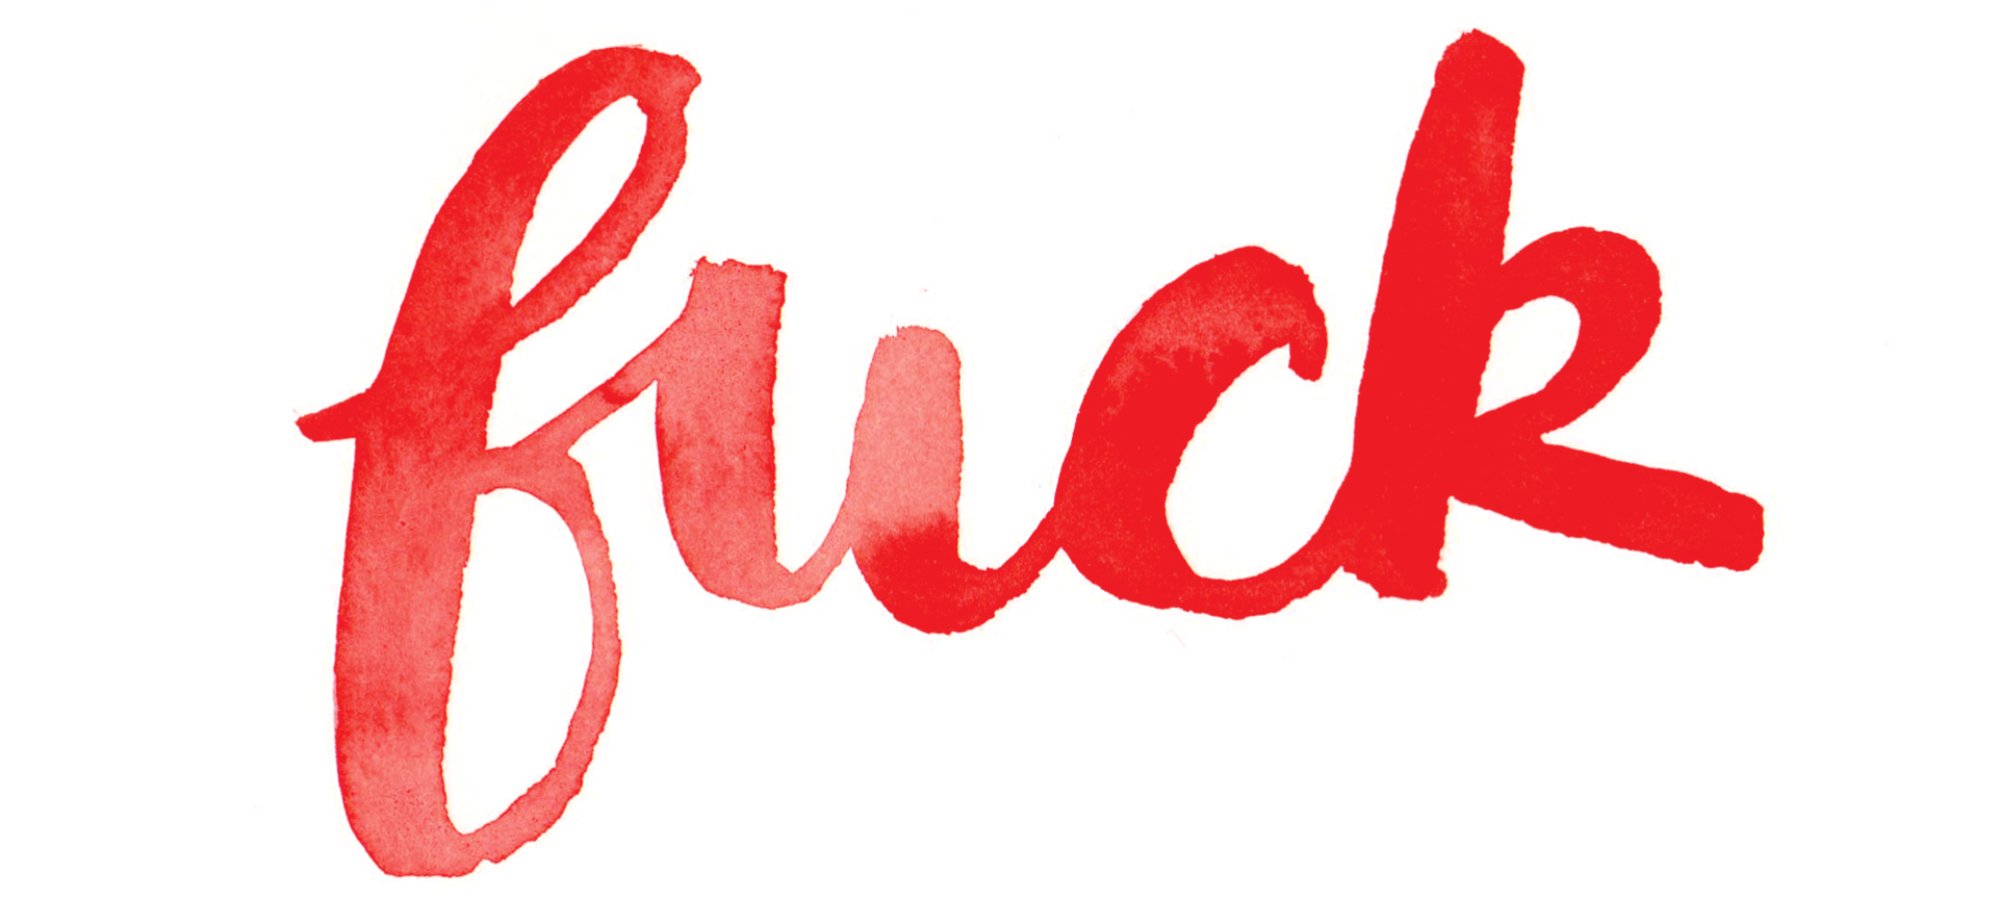 The word "fuck" in red cursive lettering.